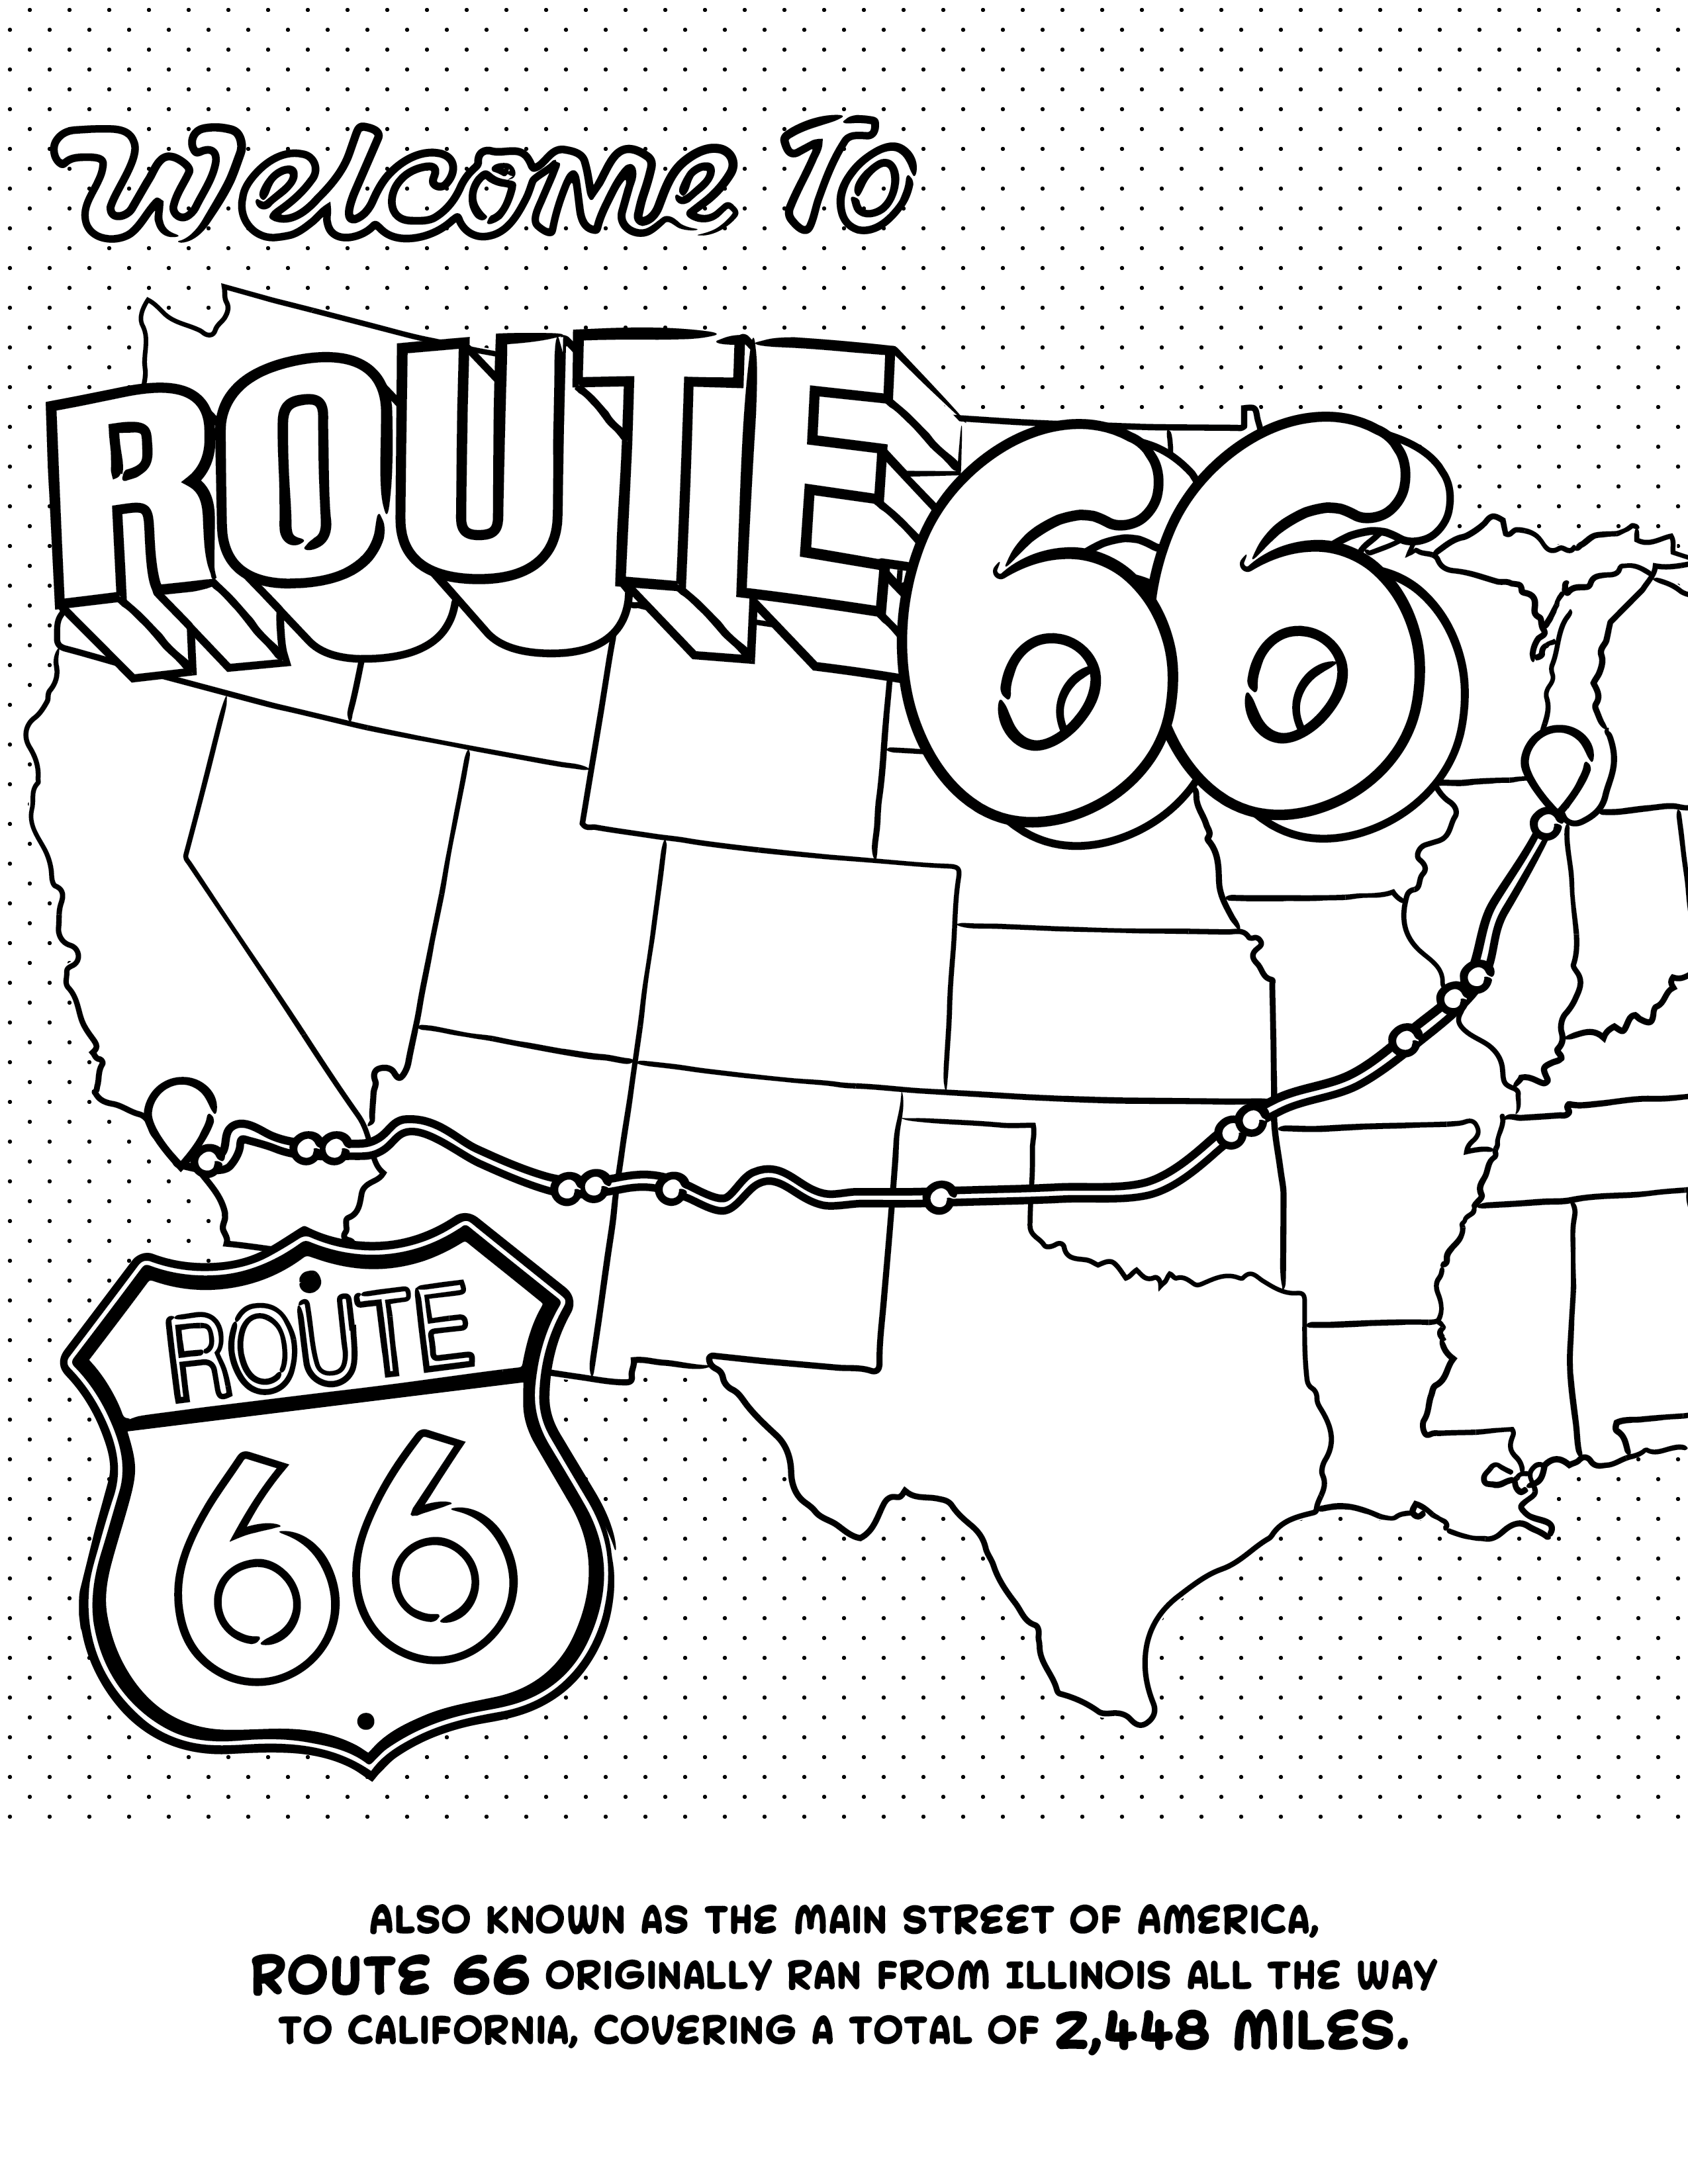 Keep Route 66 Colorful | Magnetize